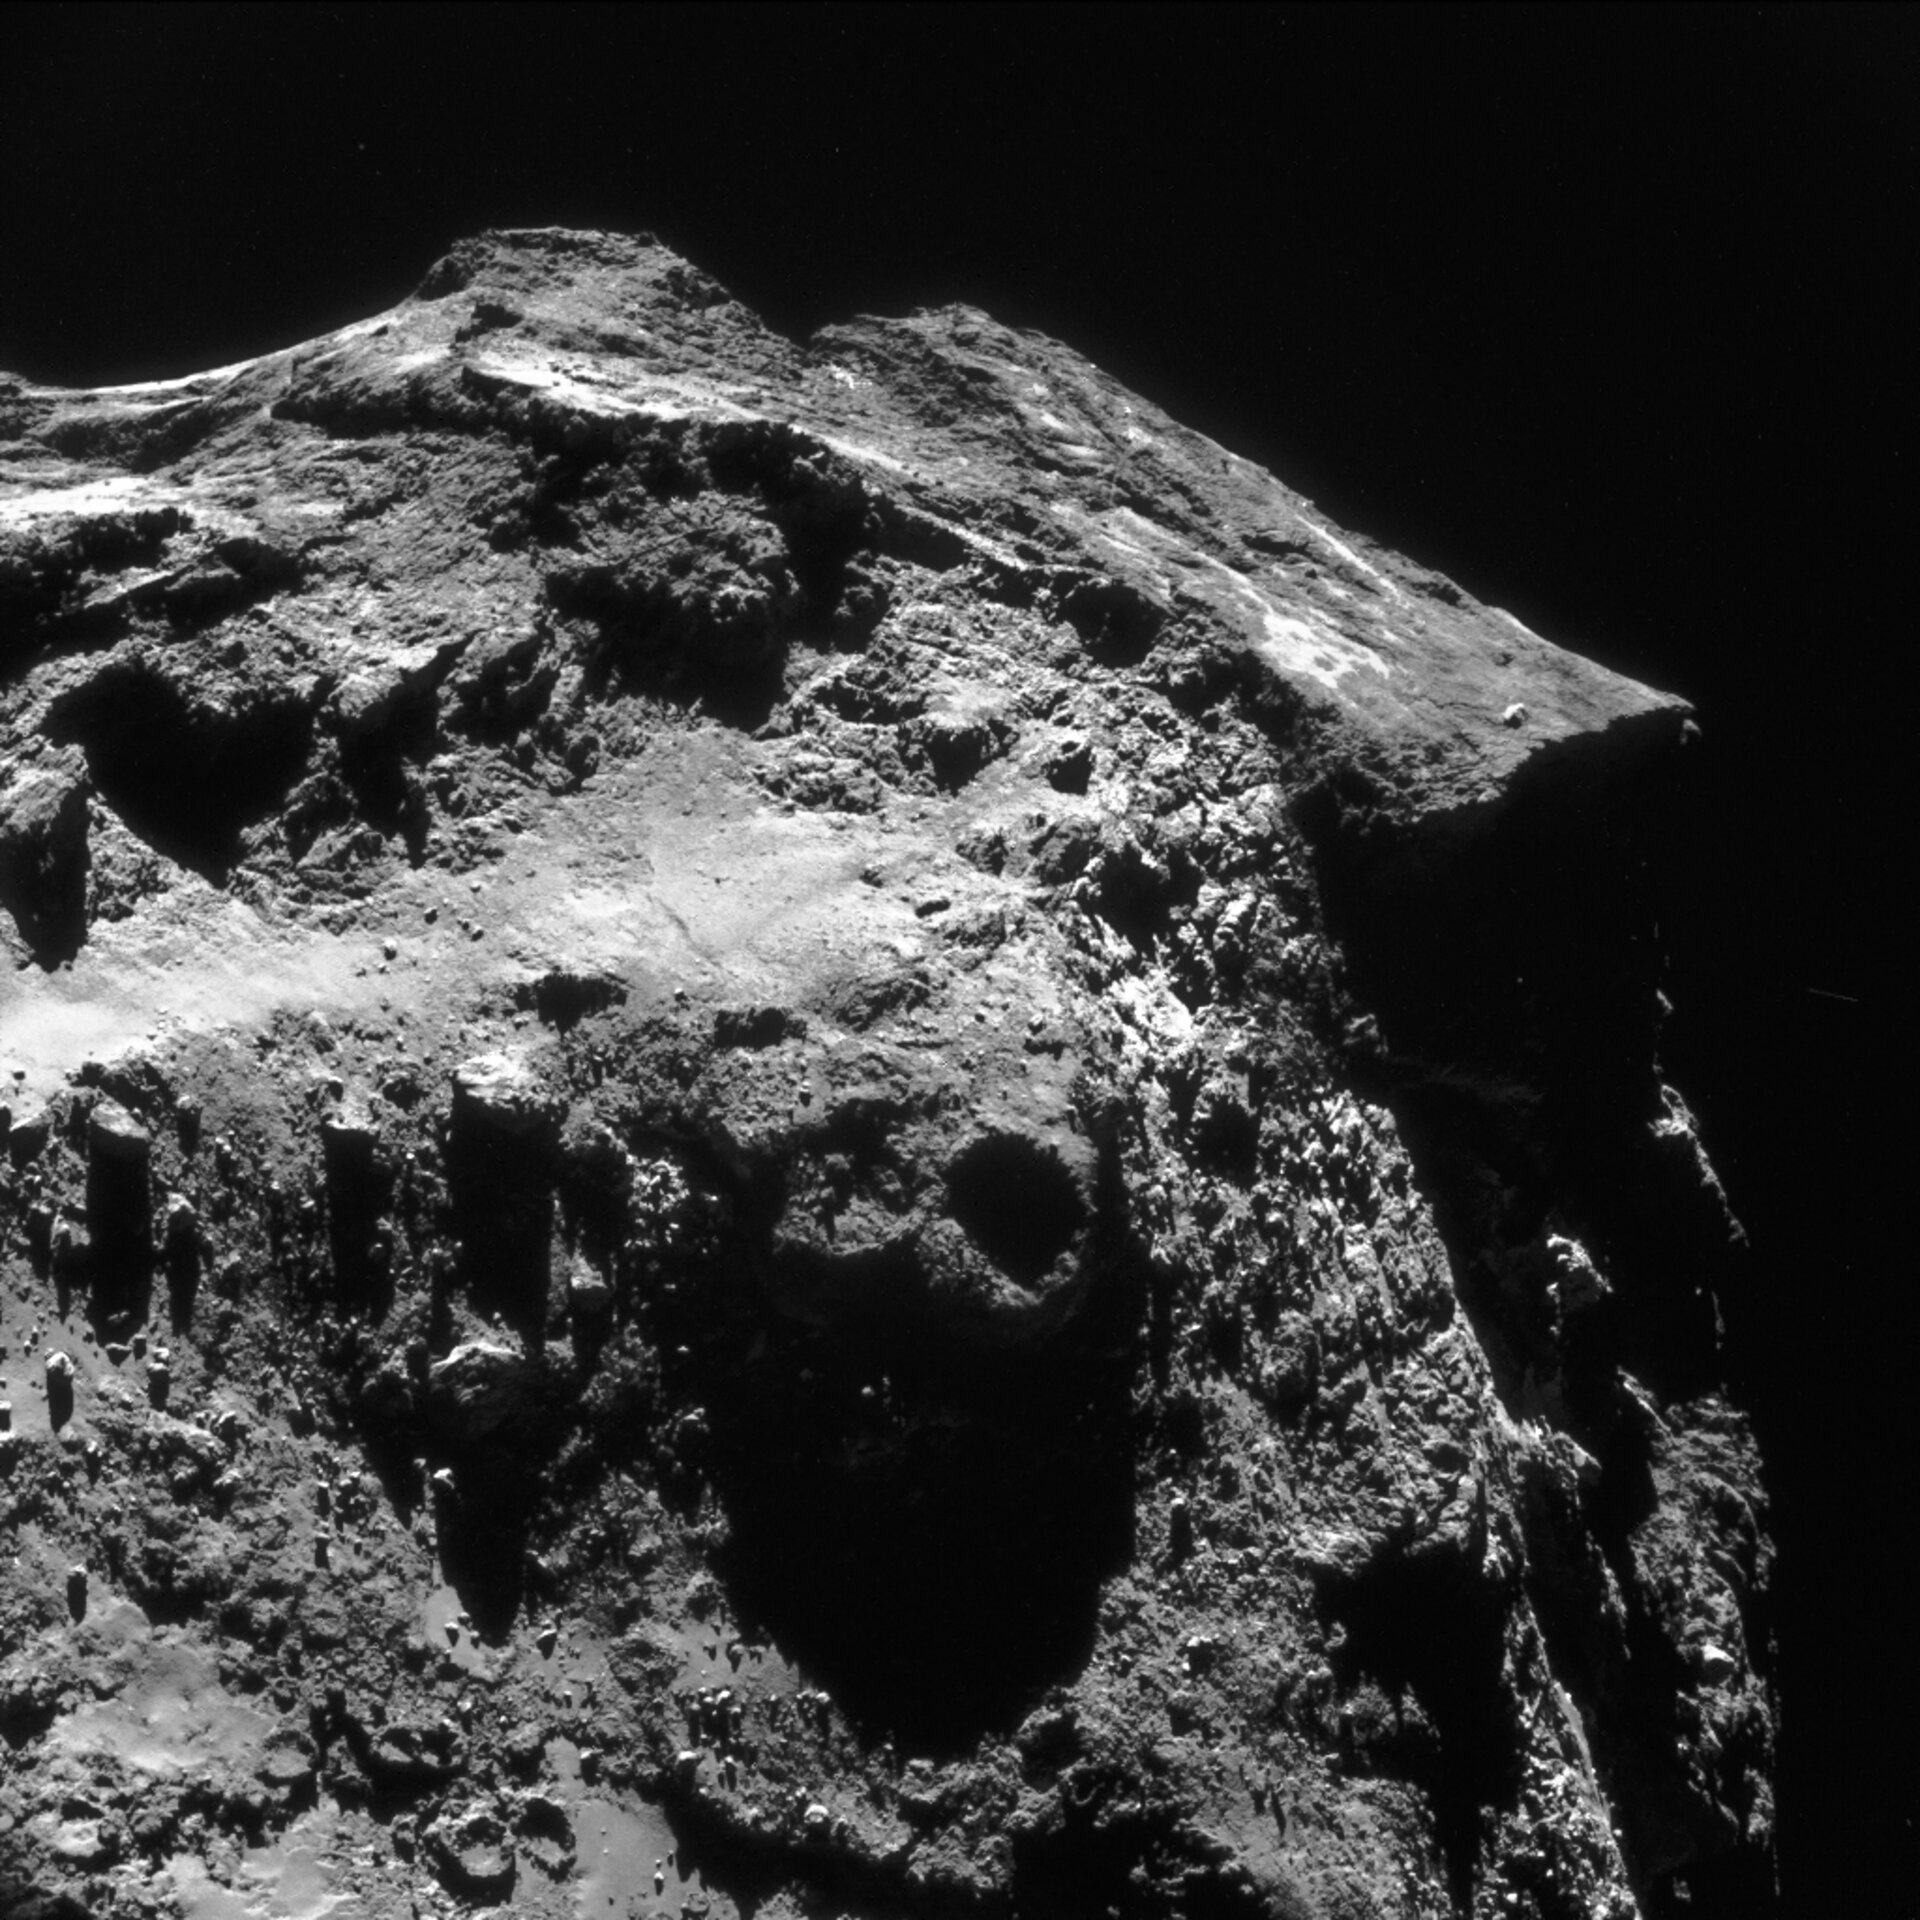 Year at a comet, December 2014